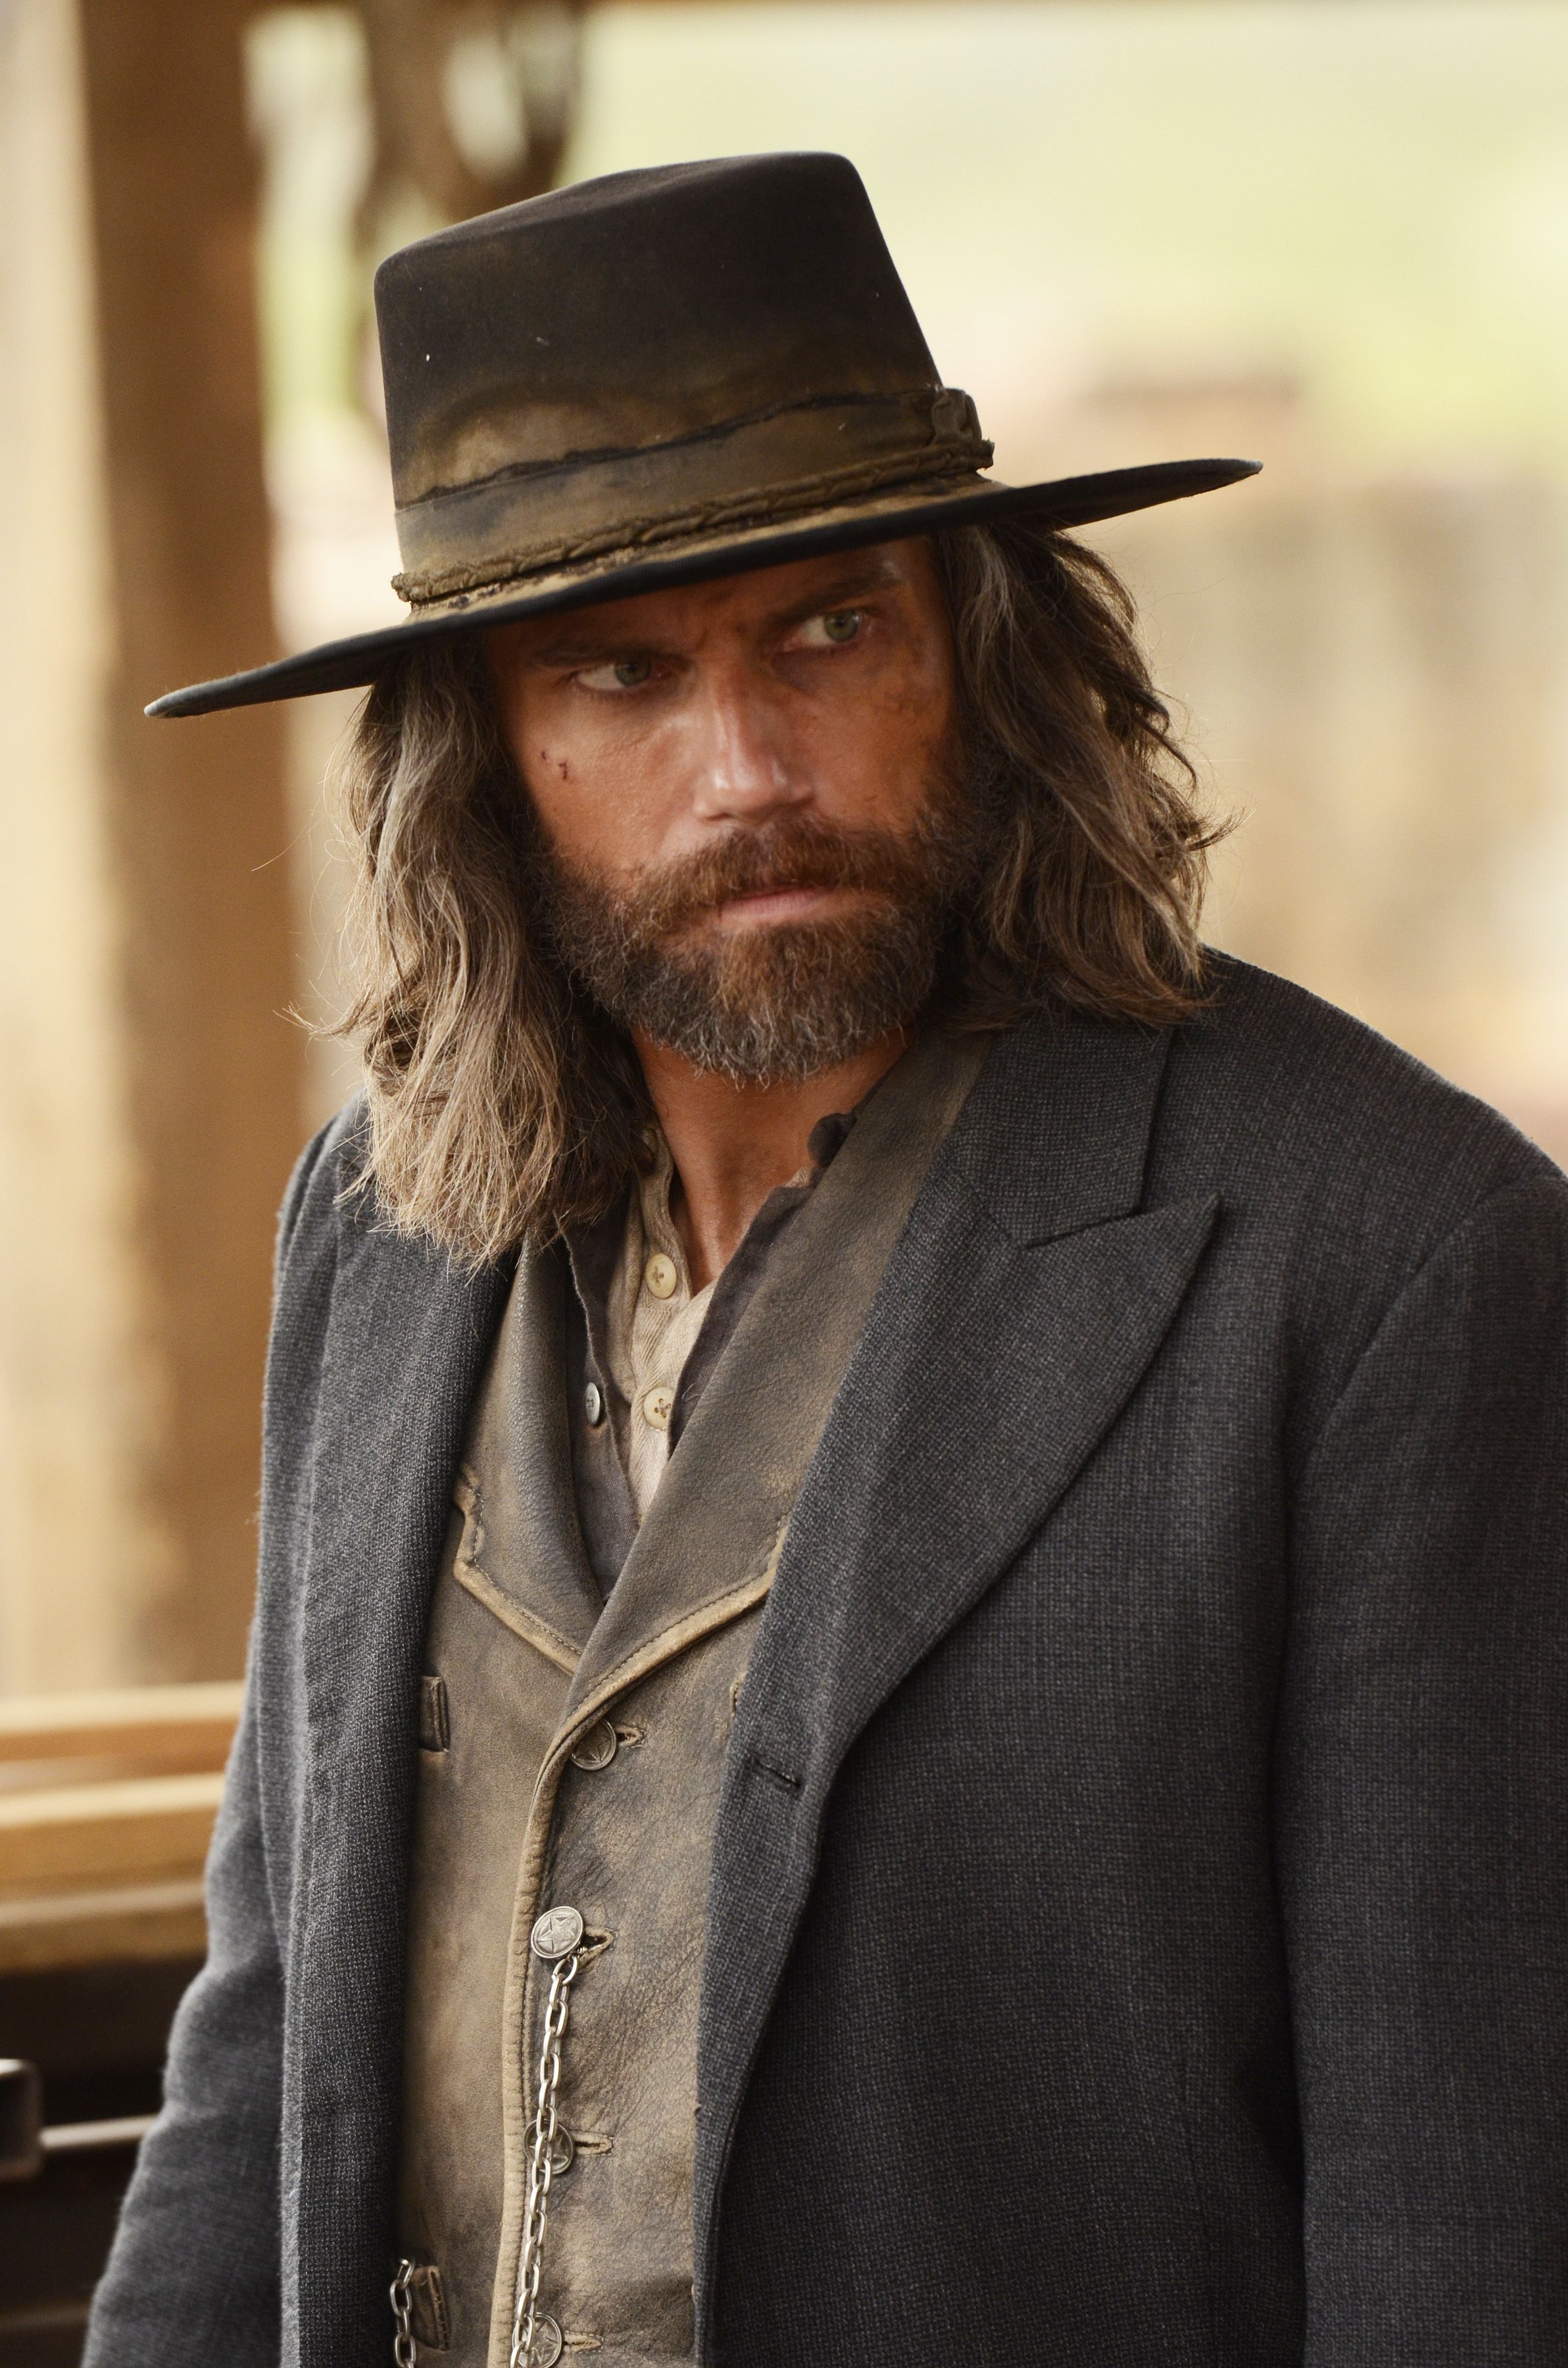 hell on wheels tv guide